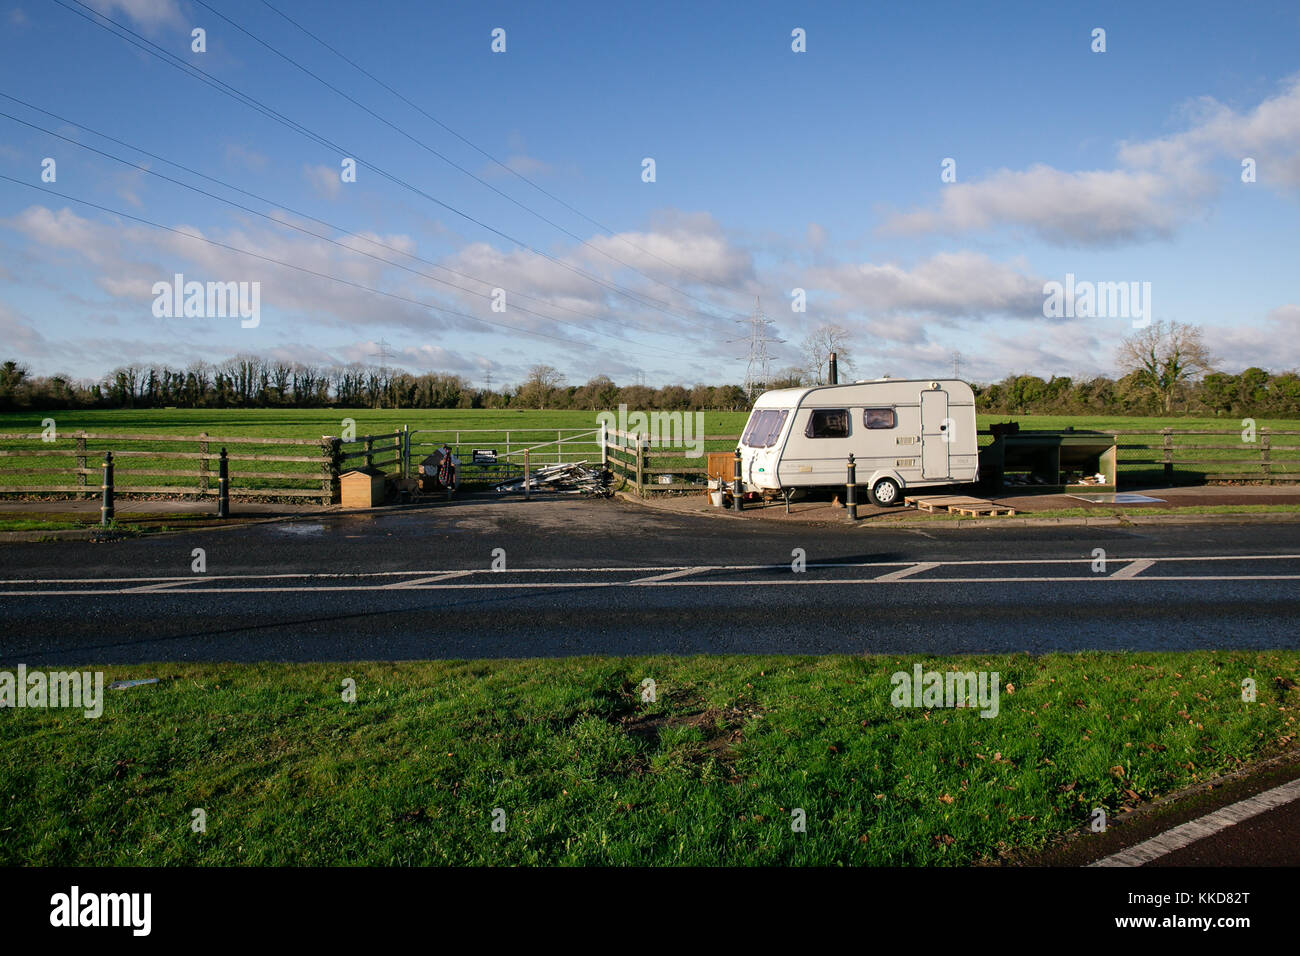 Celbridge, Ireland. 29 Nov, 2017: Irish Travellers settling in in Celbridge. Caravan parked on the side of the road at the entrance to the field. Stock Photo